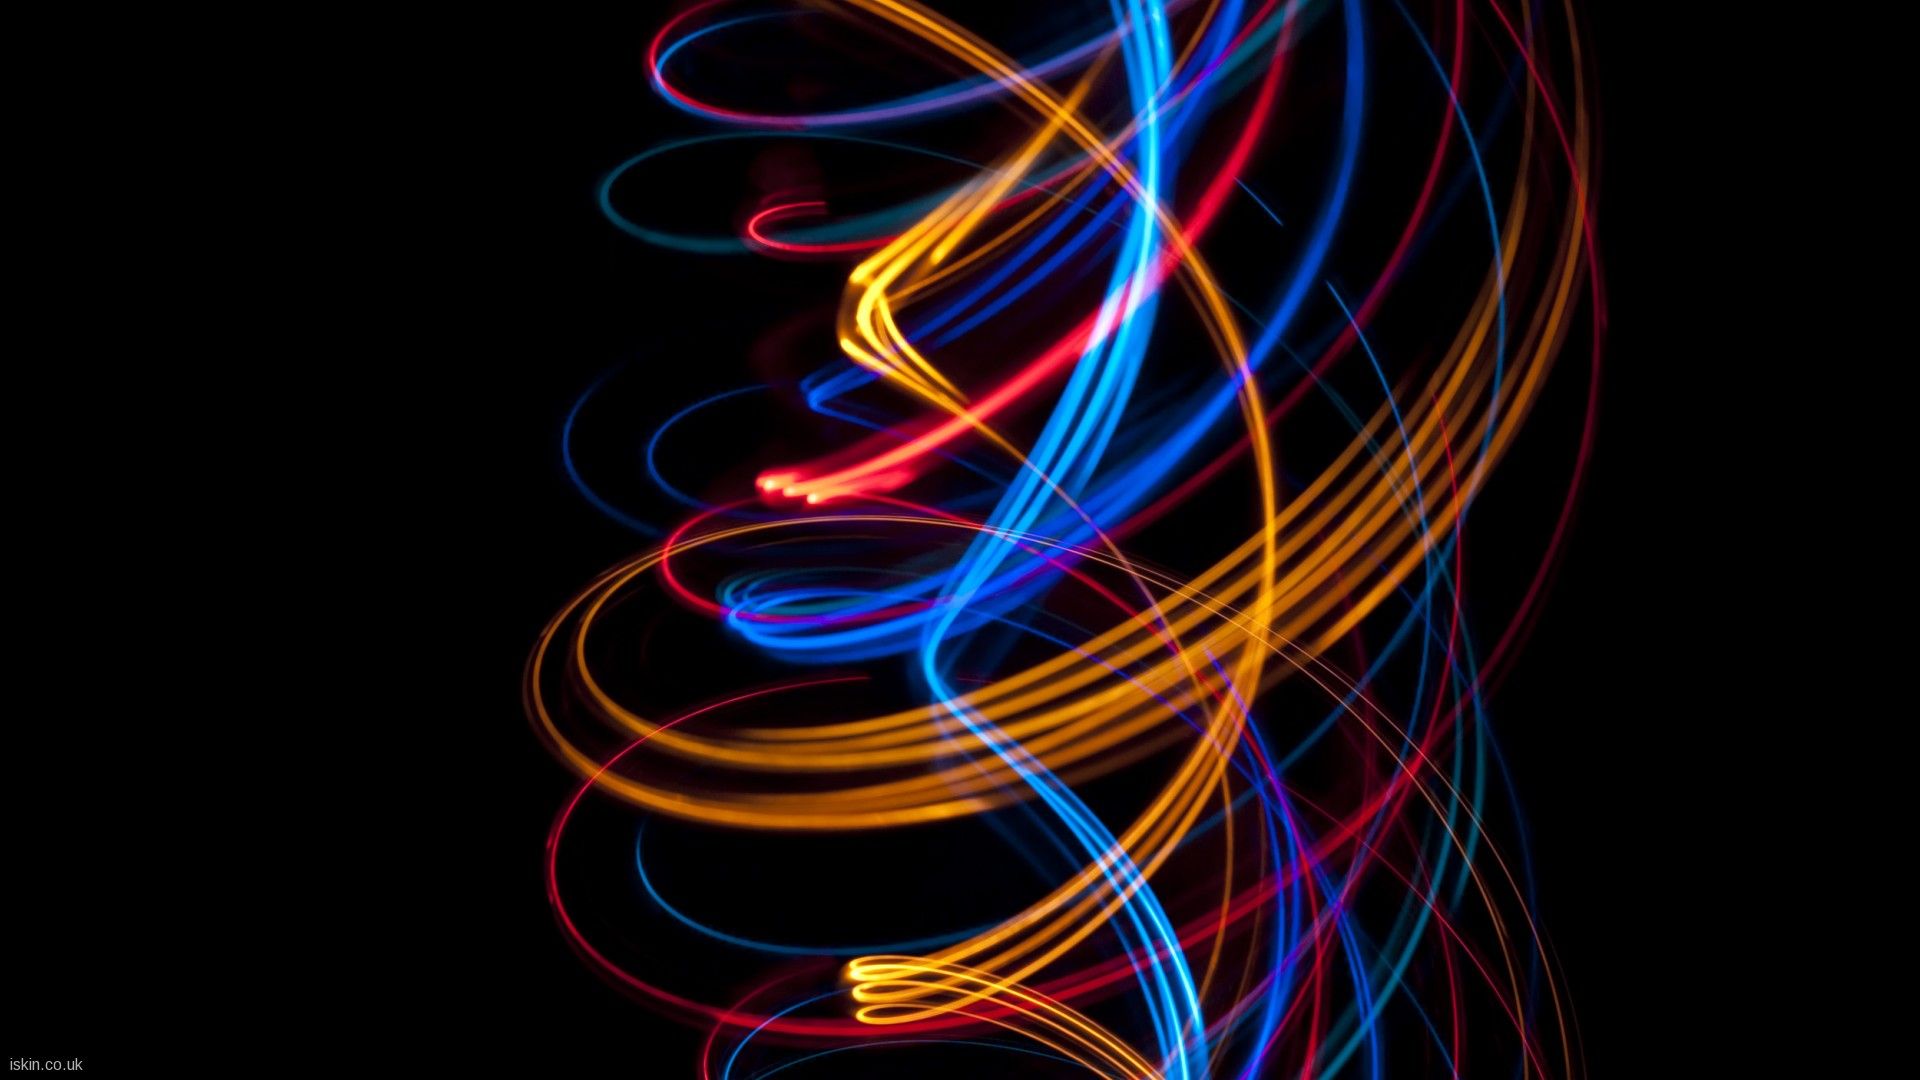 Abstract light spiral photo